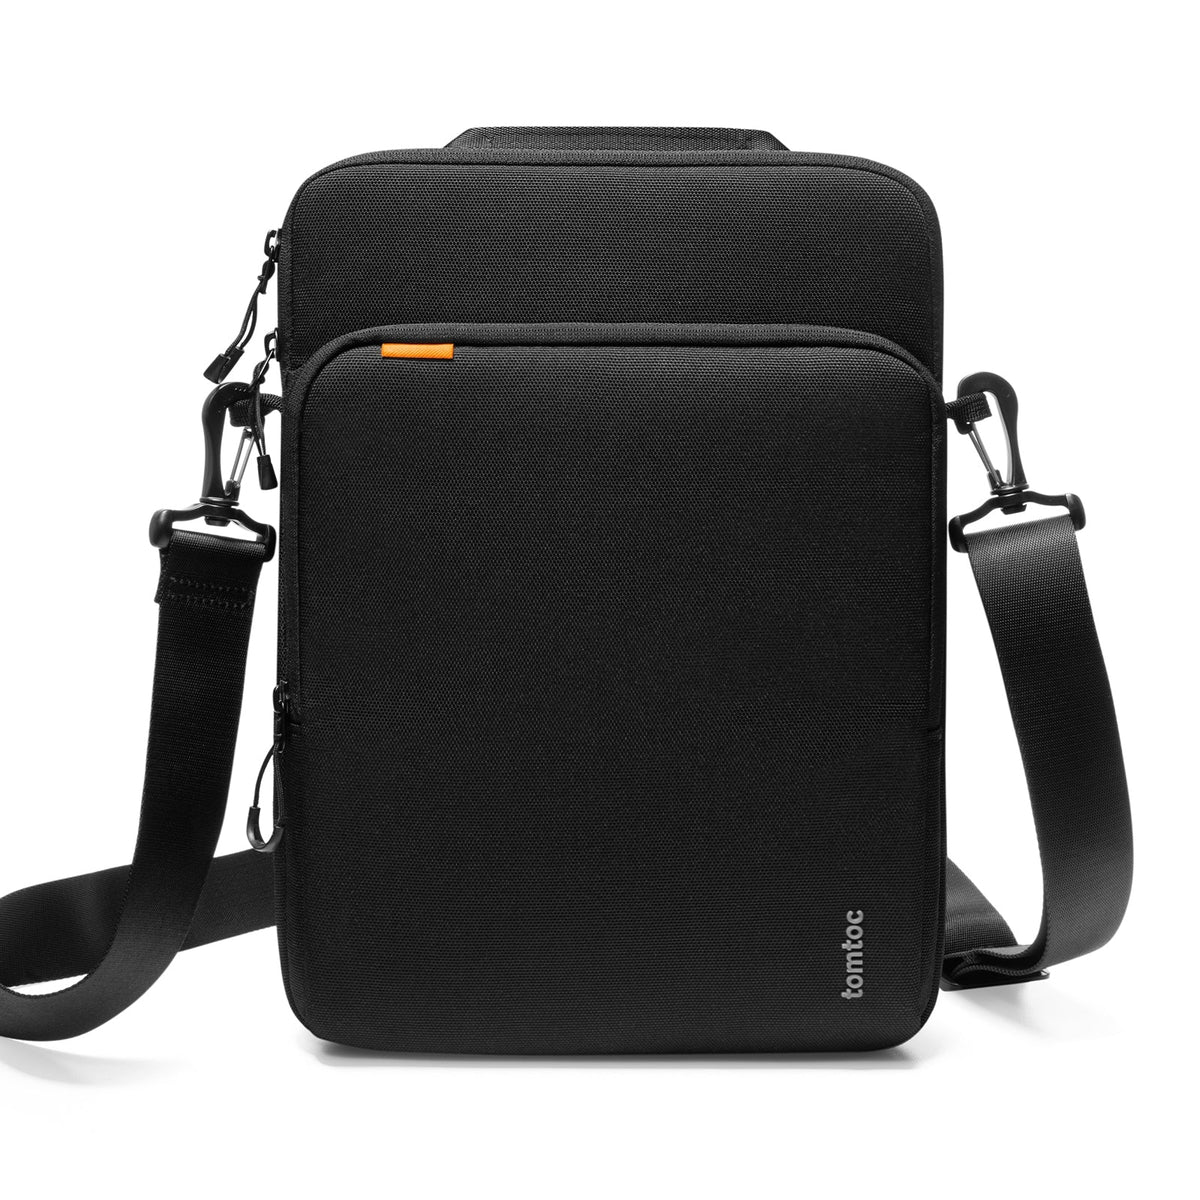 primary_DefenderACE-A03 Laptop Shoulder Bag For 14-inch MacBook Pro/ Microsoft New Surface | Black